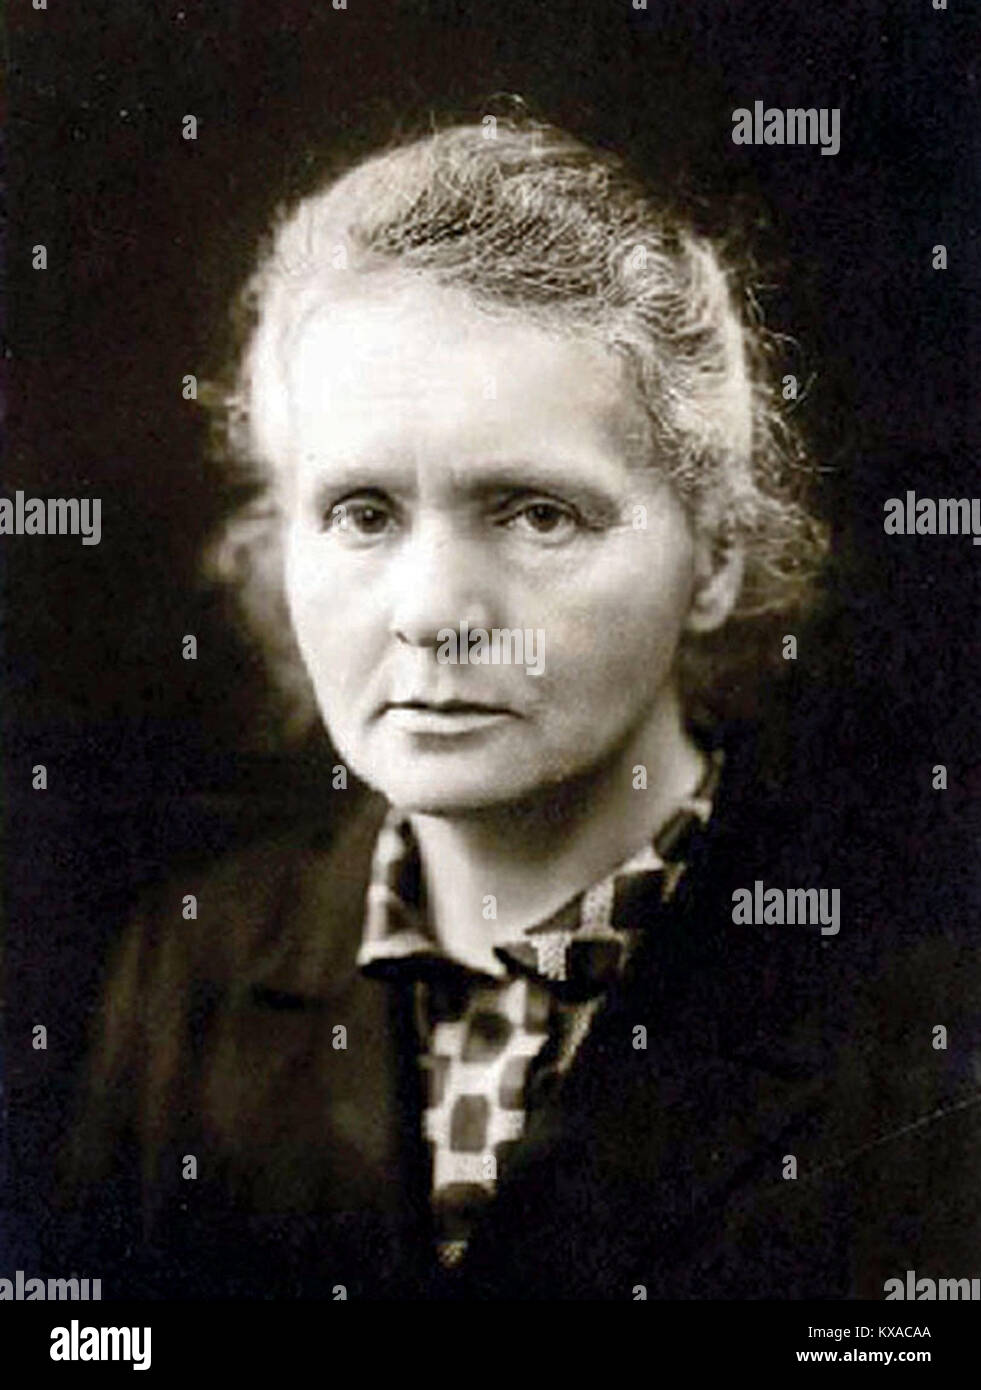 Marie Curie, Marie Skłodowska Curie (1867 – 1934) Polish and naturalized-French physicist and chemist who conducted pioneering research on radioactivity. She was the first woman to win a Nobel Prize, Stock Photo